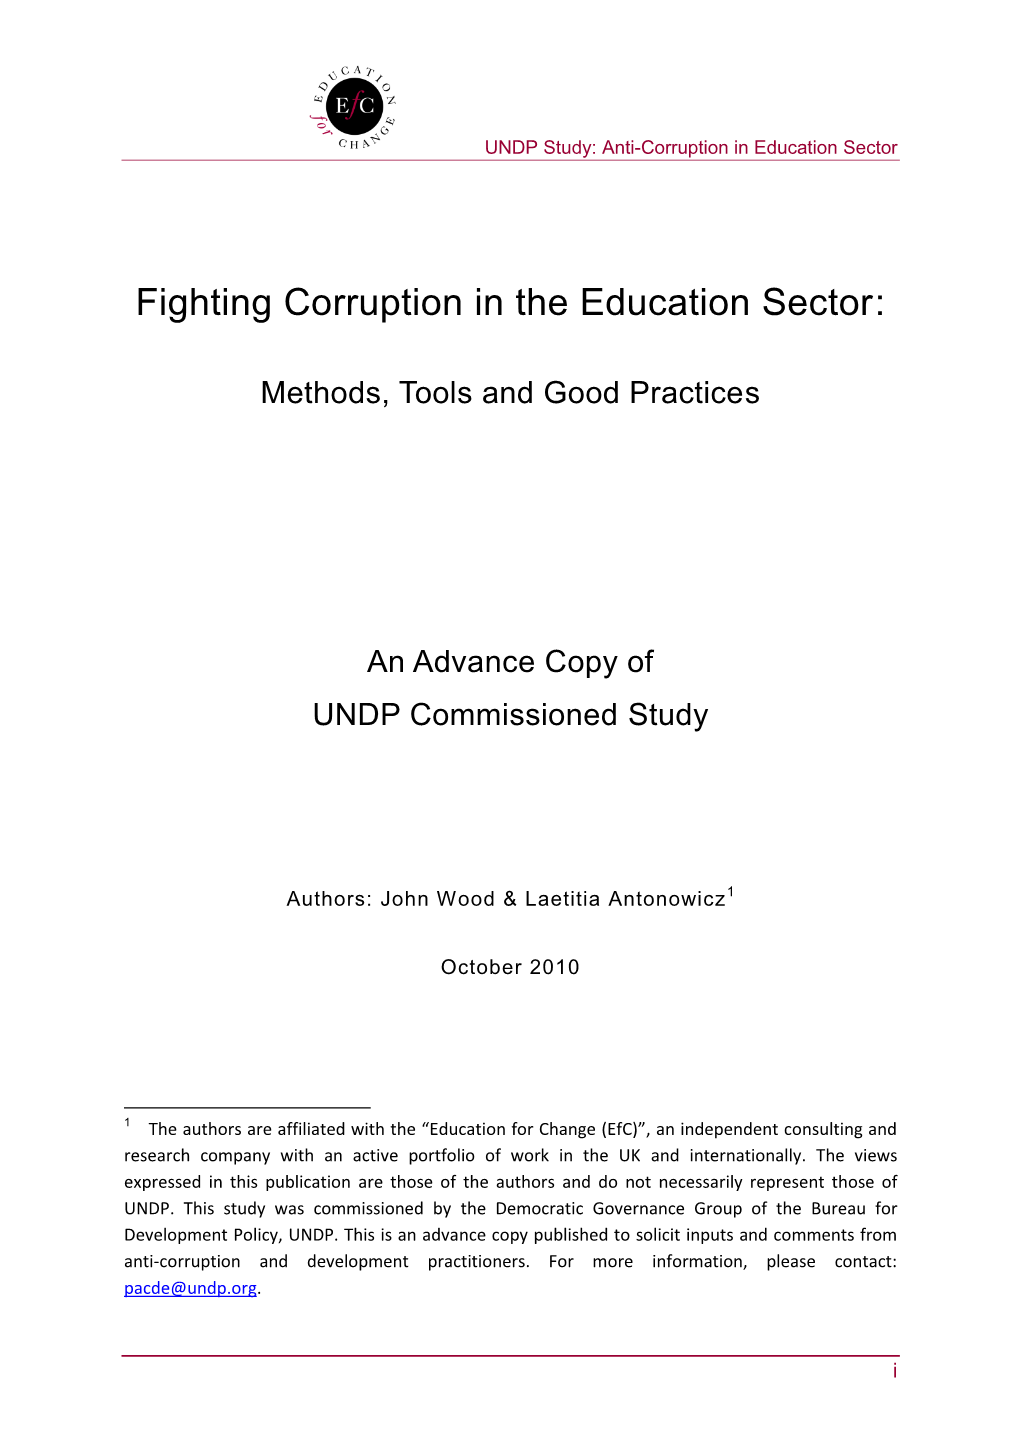 Fighting Corruption in the Education Sector